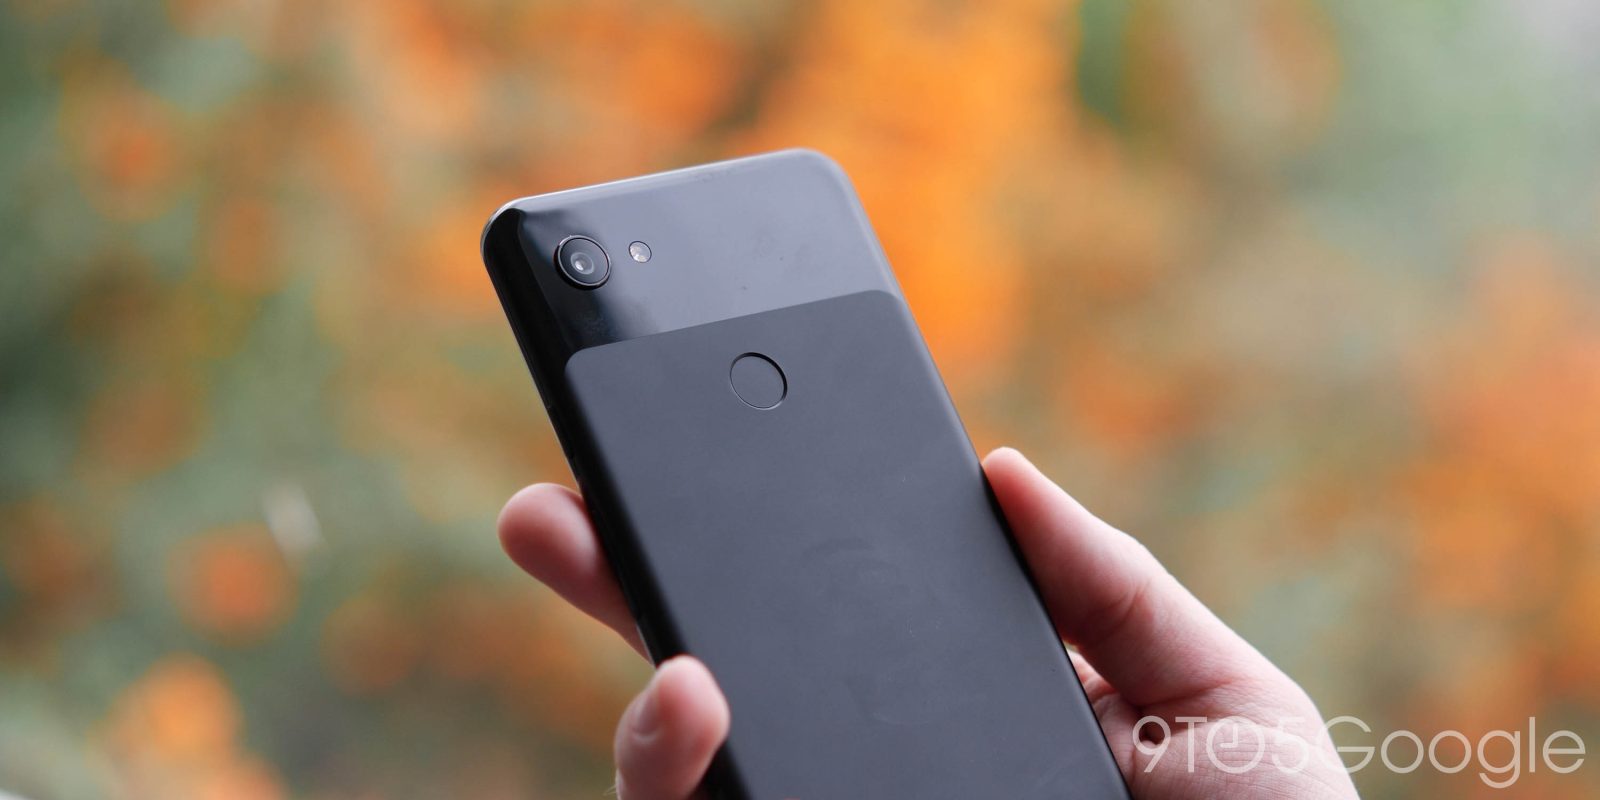 is the Pixel 3a XL the best Google phone so far?